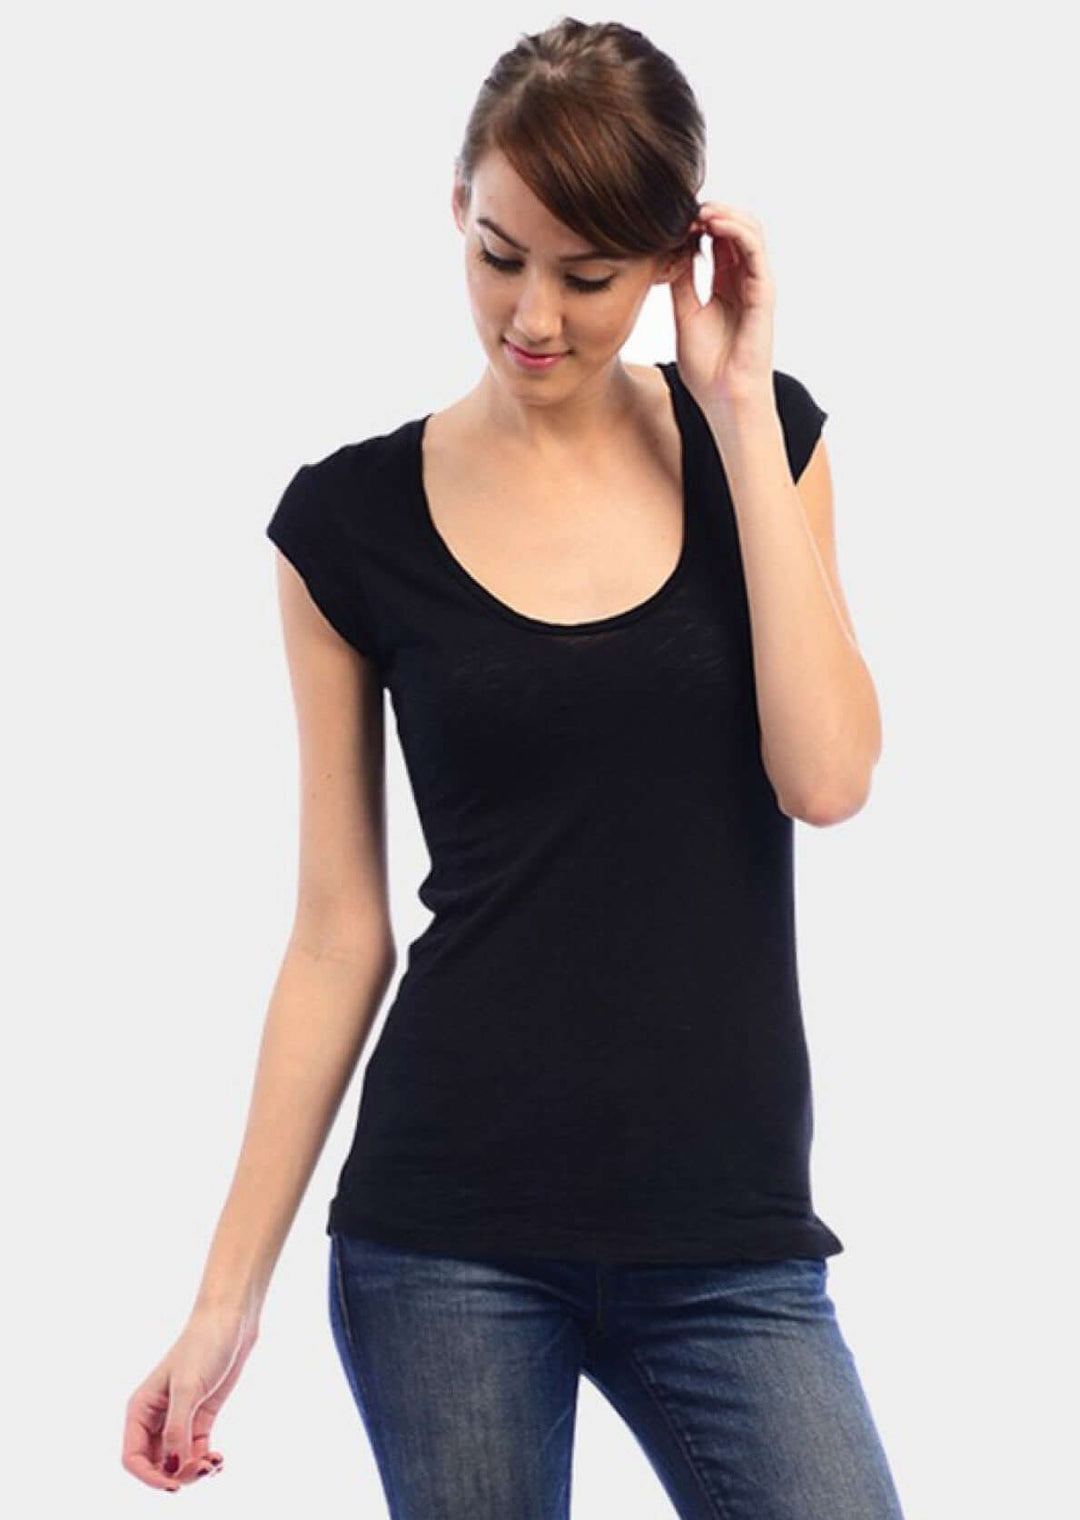 Made in USA Women's Scoop Neck Basic Garment Dyed Cotton Tee T-Shirt with Shirring at Shoulder in Black | Classy Cozy Cool Made in America Boutique